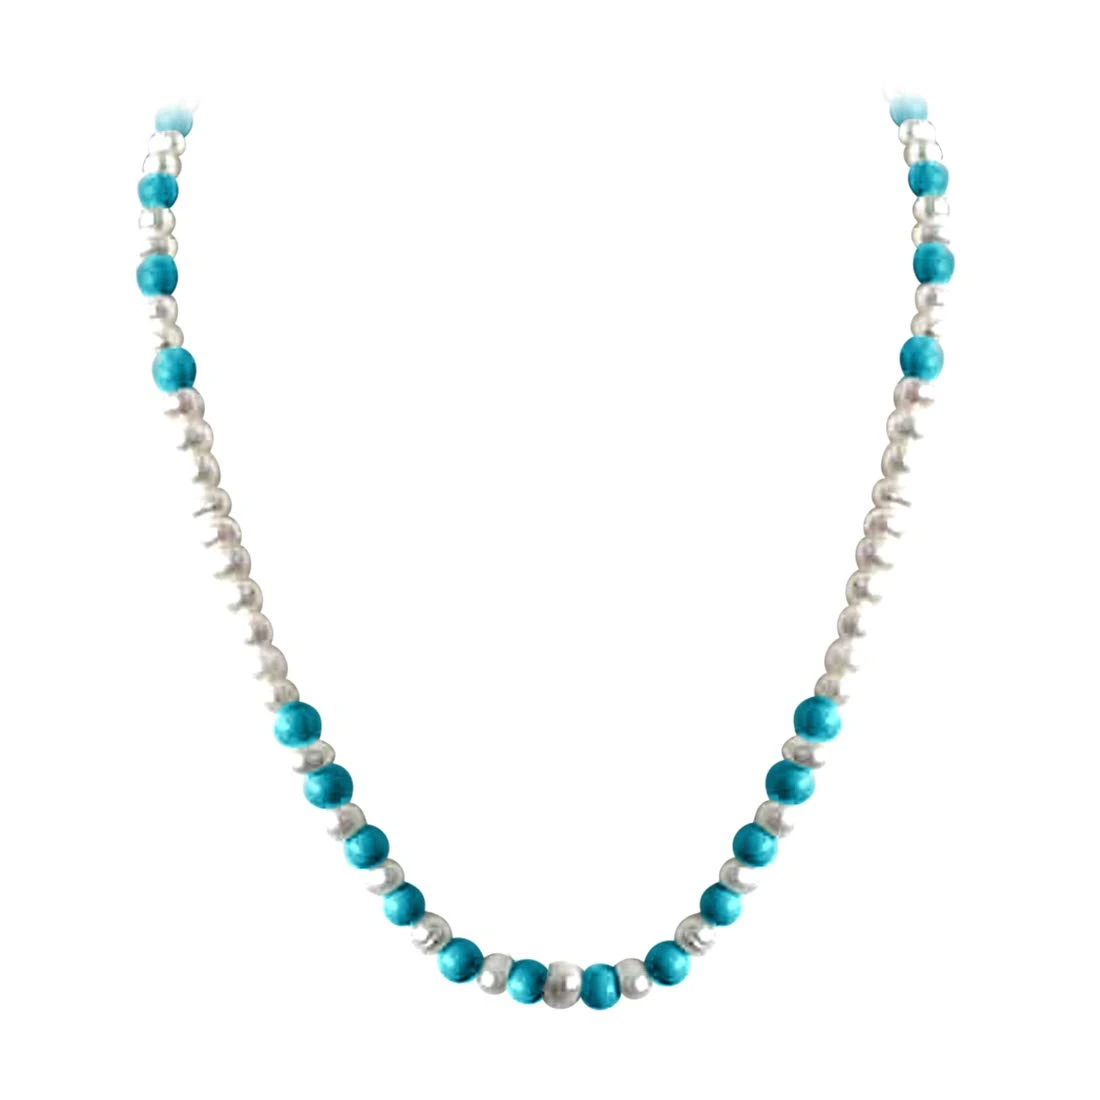 Embrace Elegance with Every Turn: Discover the Timeless Charm of Our Freshwater Pearl & Turquoise Bead Necklace